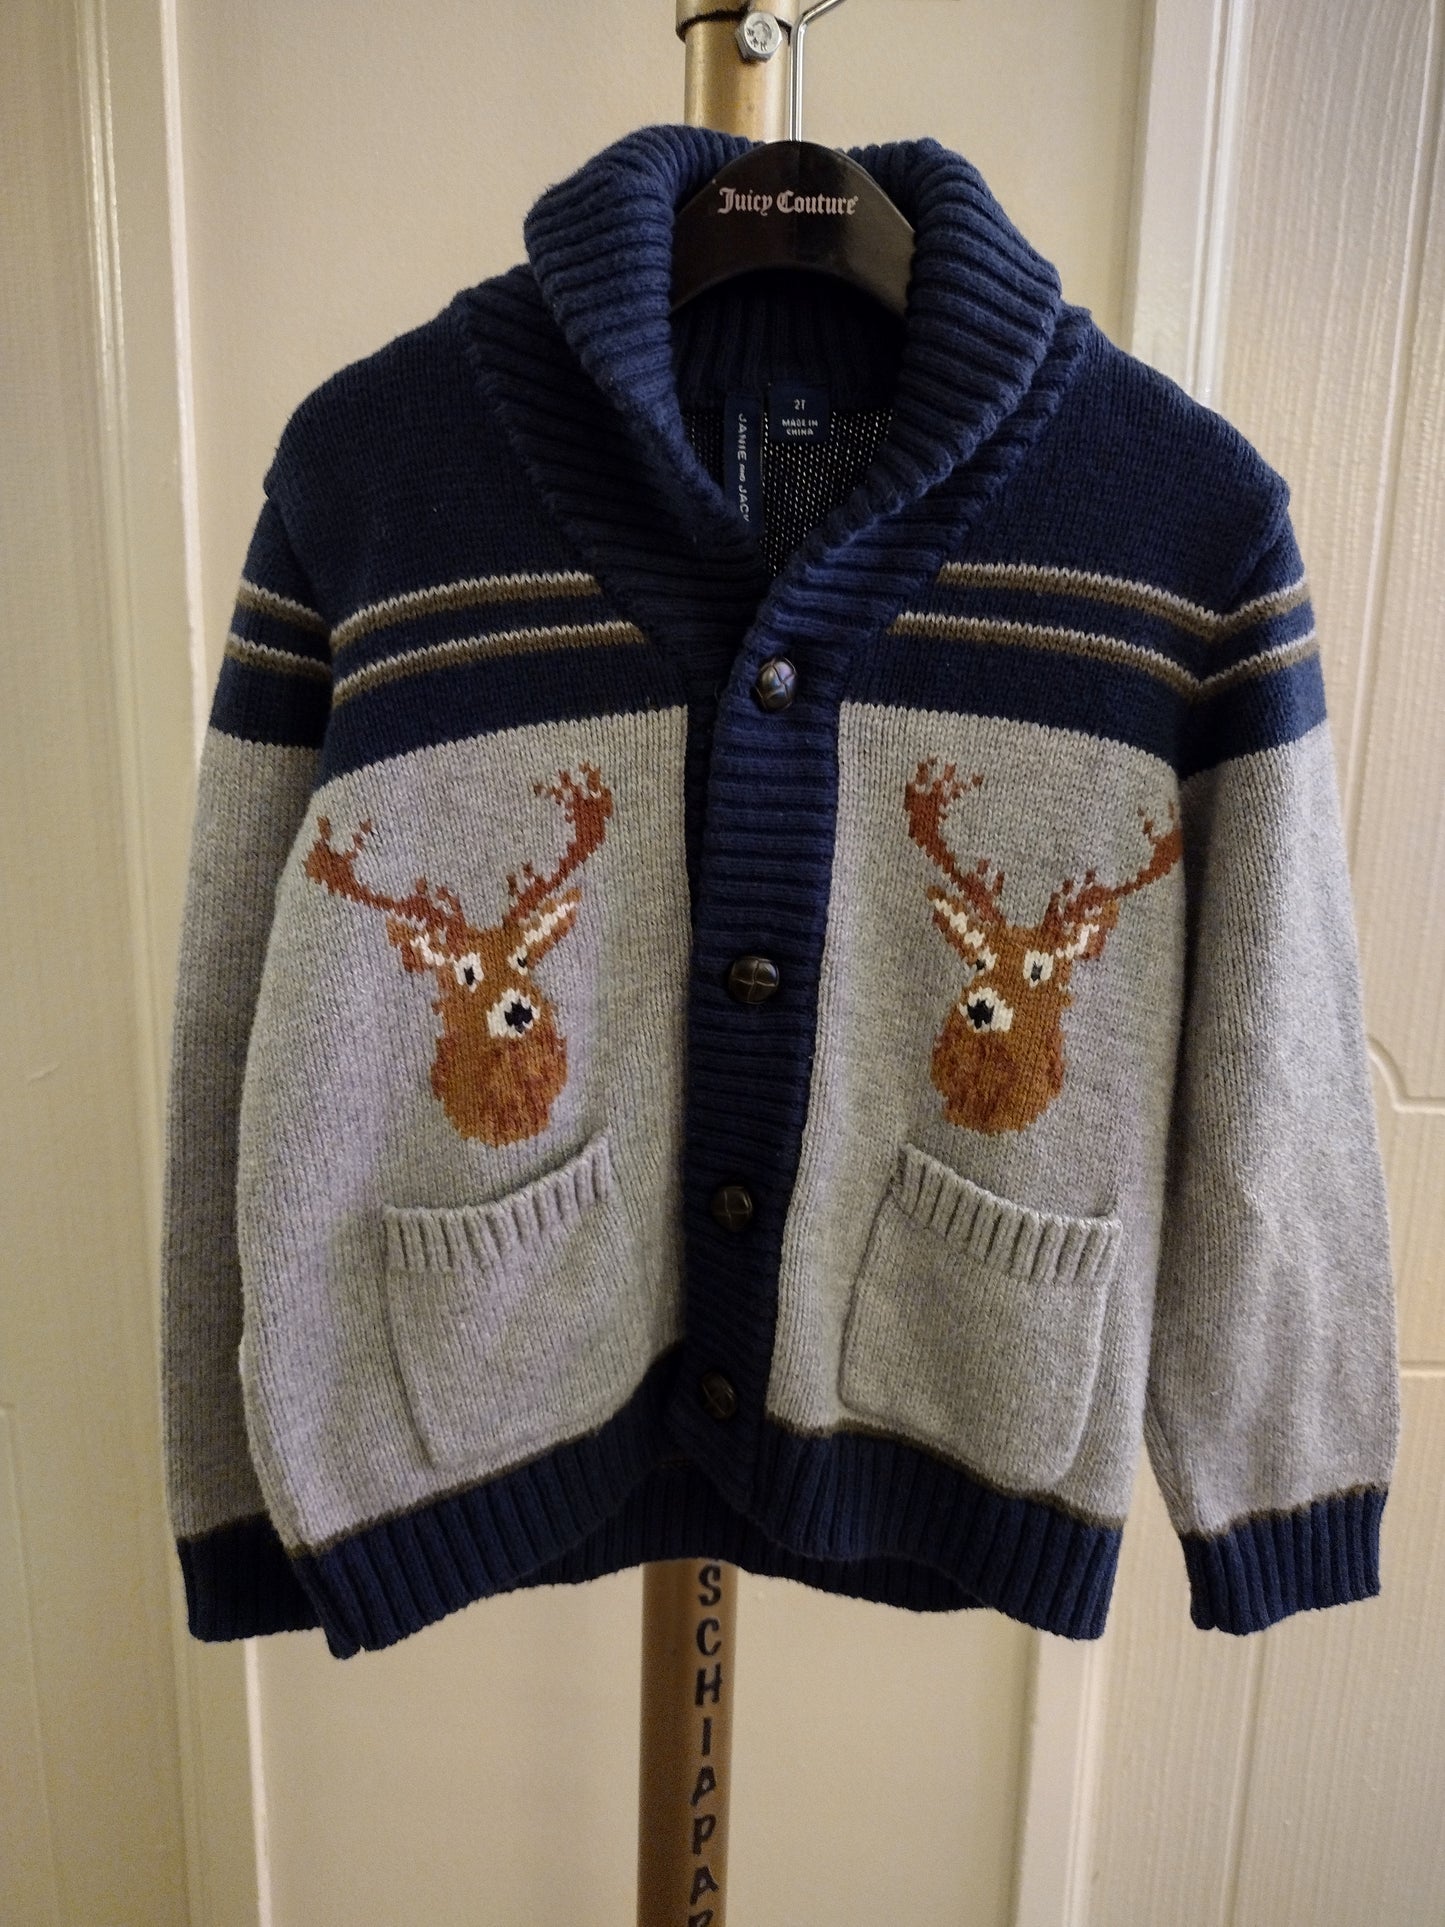 Janie and Jack Reindeer Shawl Collar Cardigan Sweater Long Sleeve Multi Color